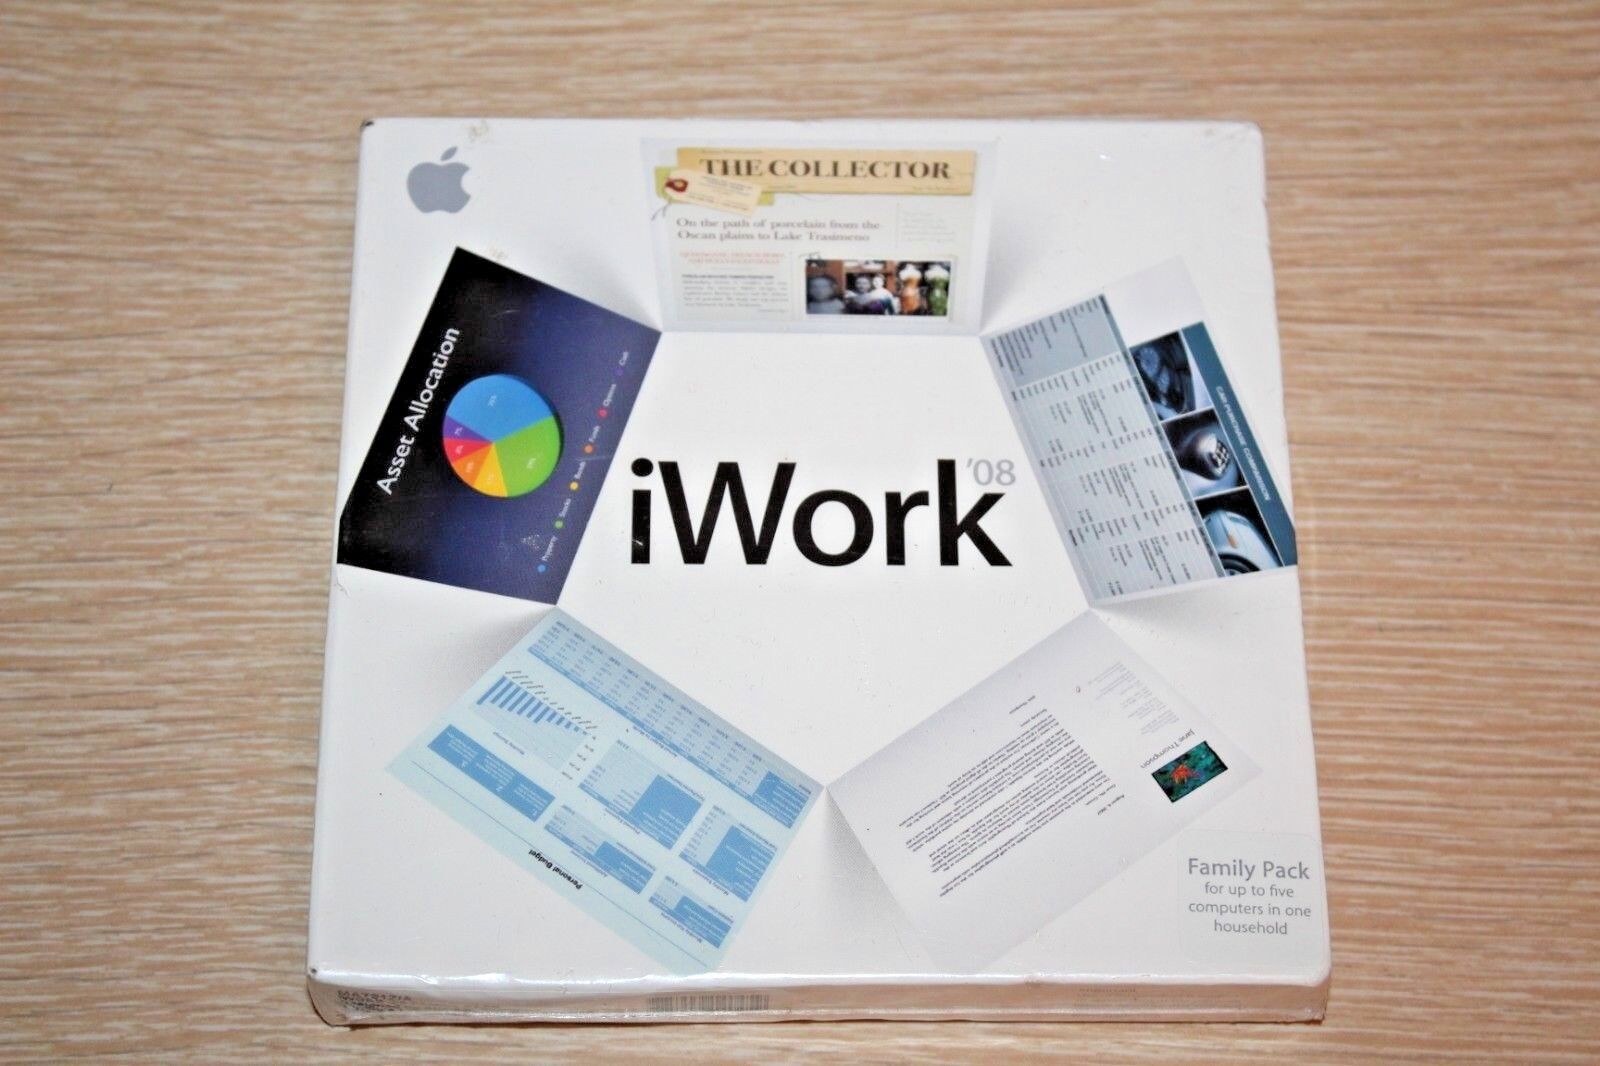 Apple iWork 08 Family Pack for Mac (MA791Z/A) NEW SEALED IN SHRINK WRAP